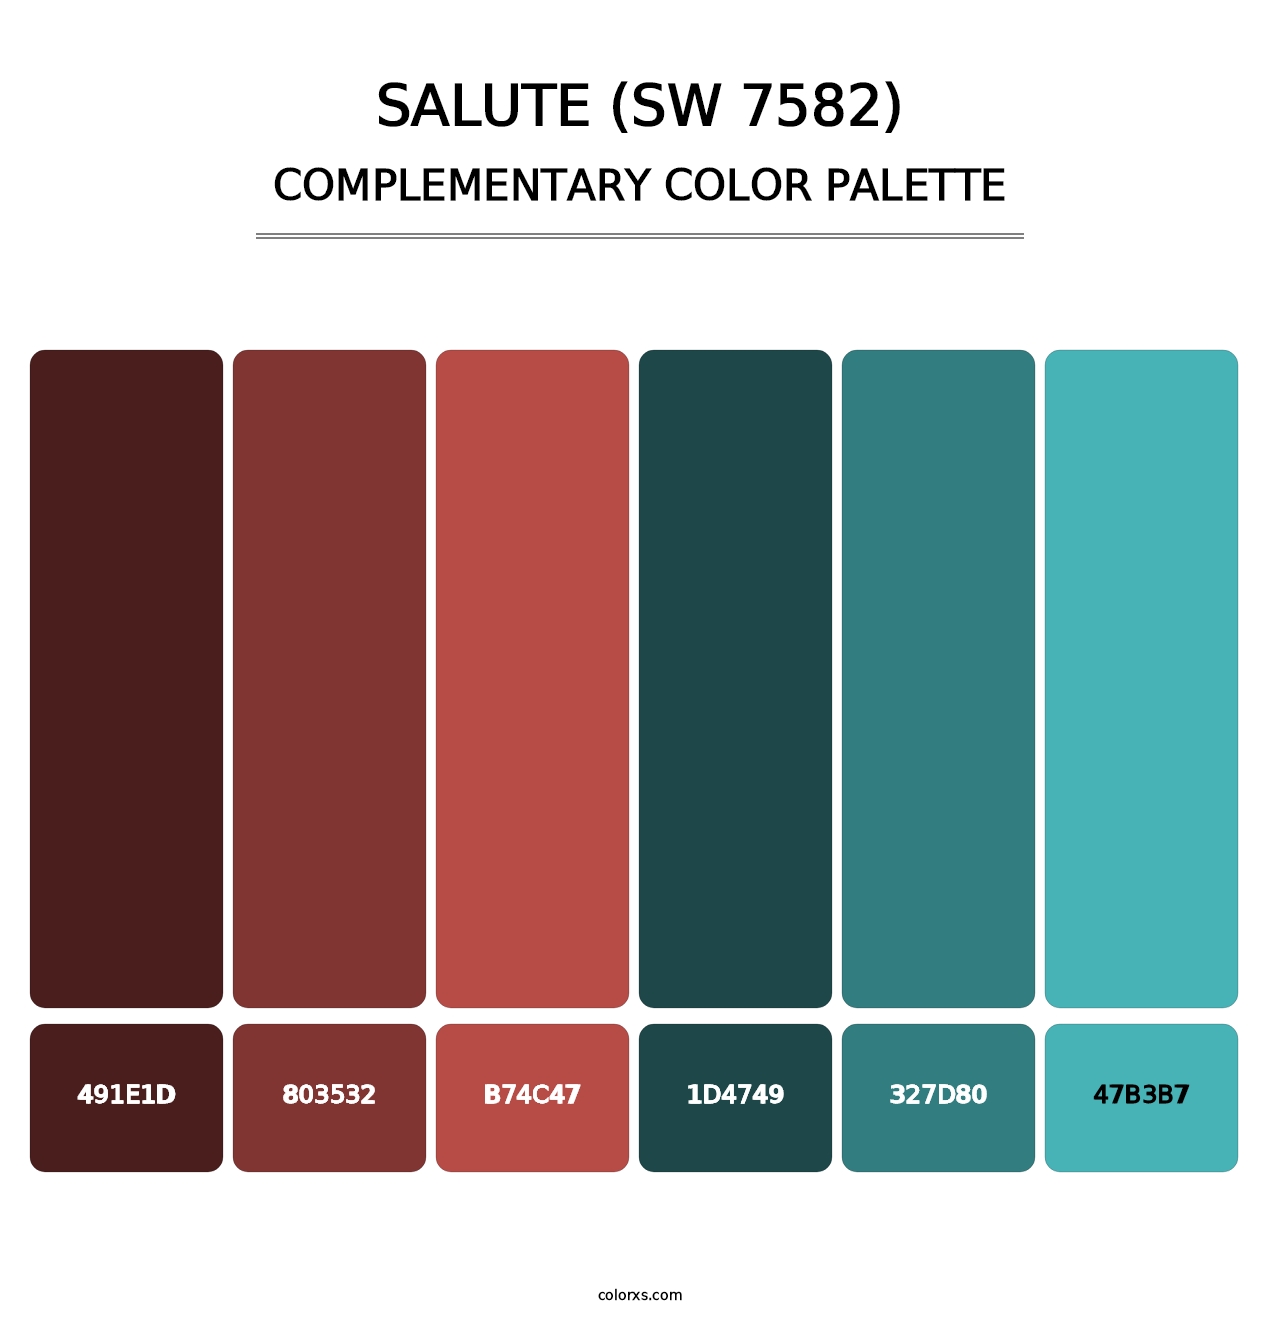 Salute (SW 7582) - Complementary Color Palette